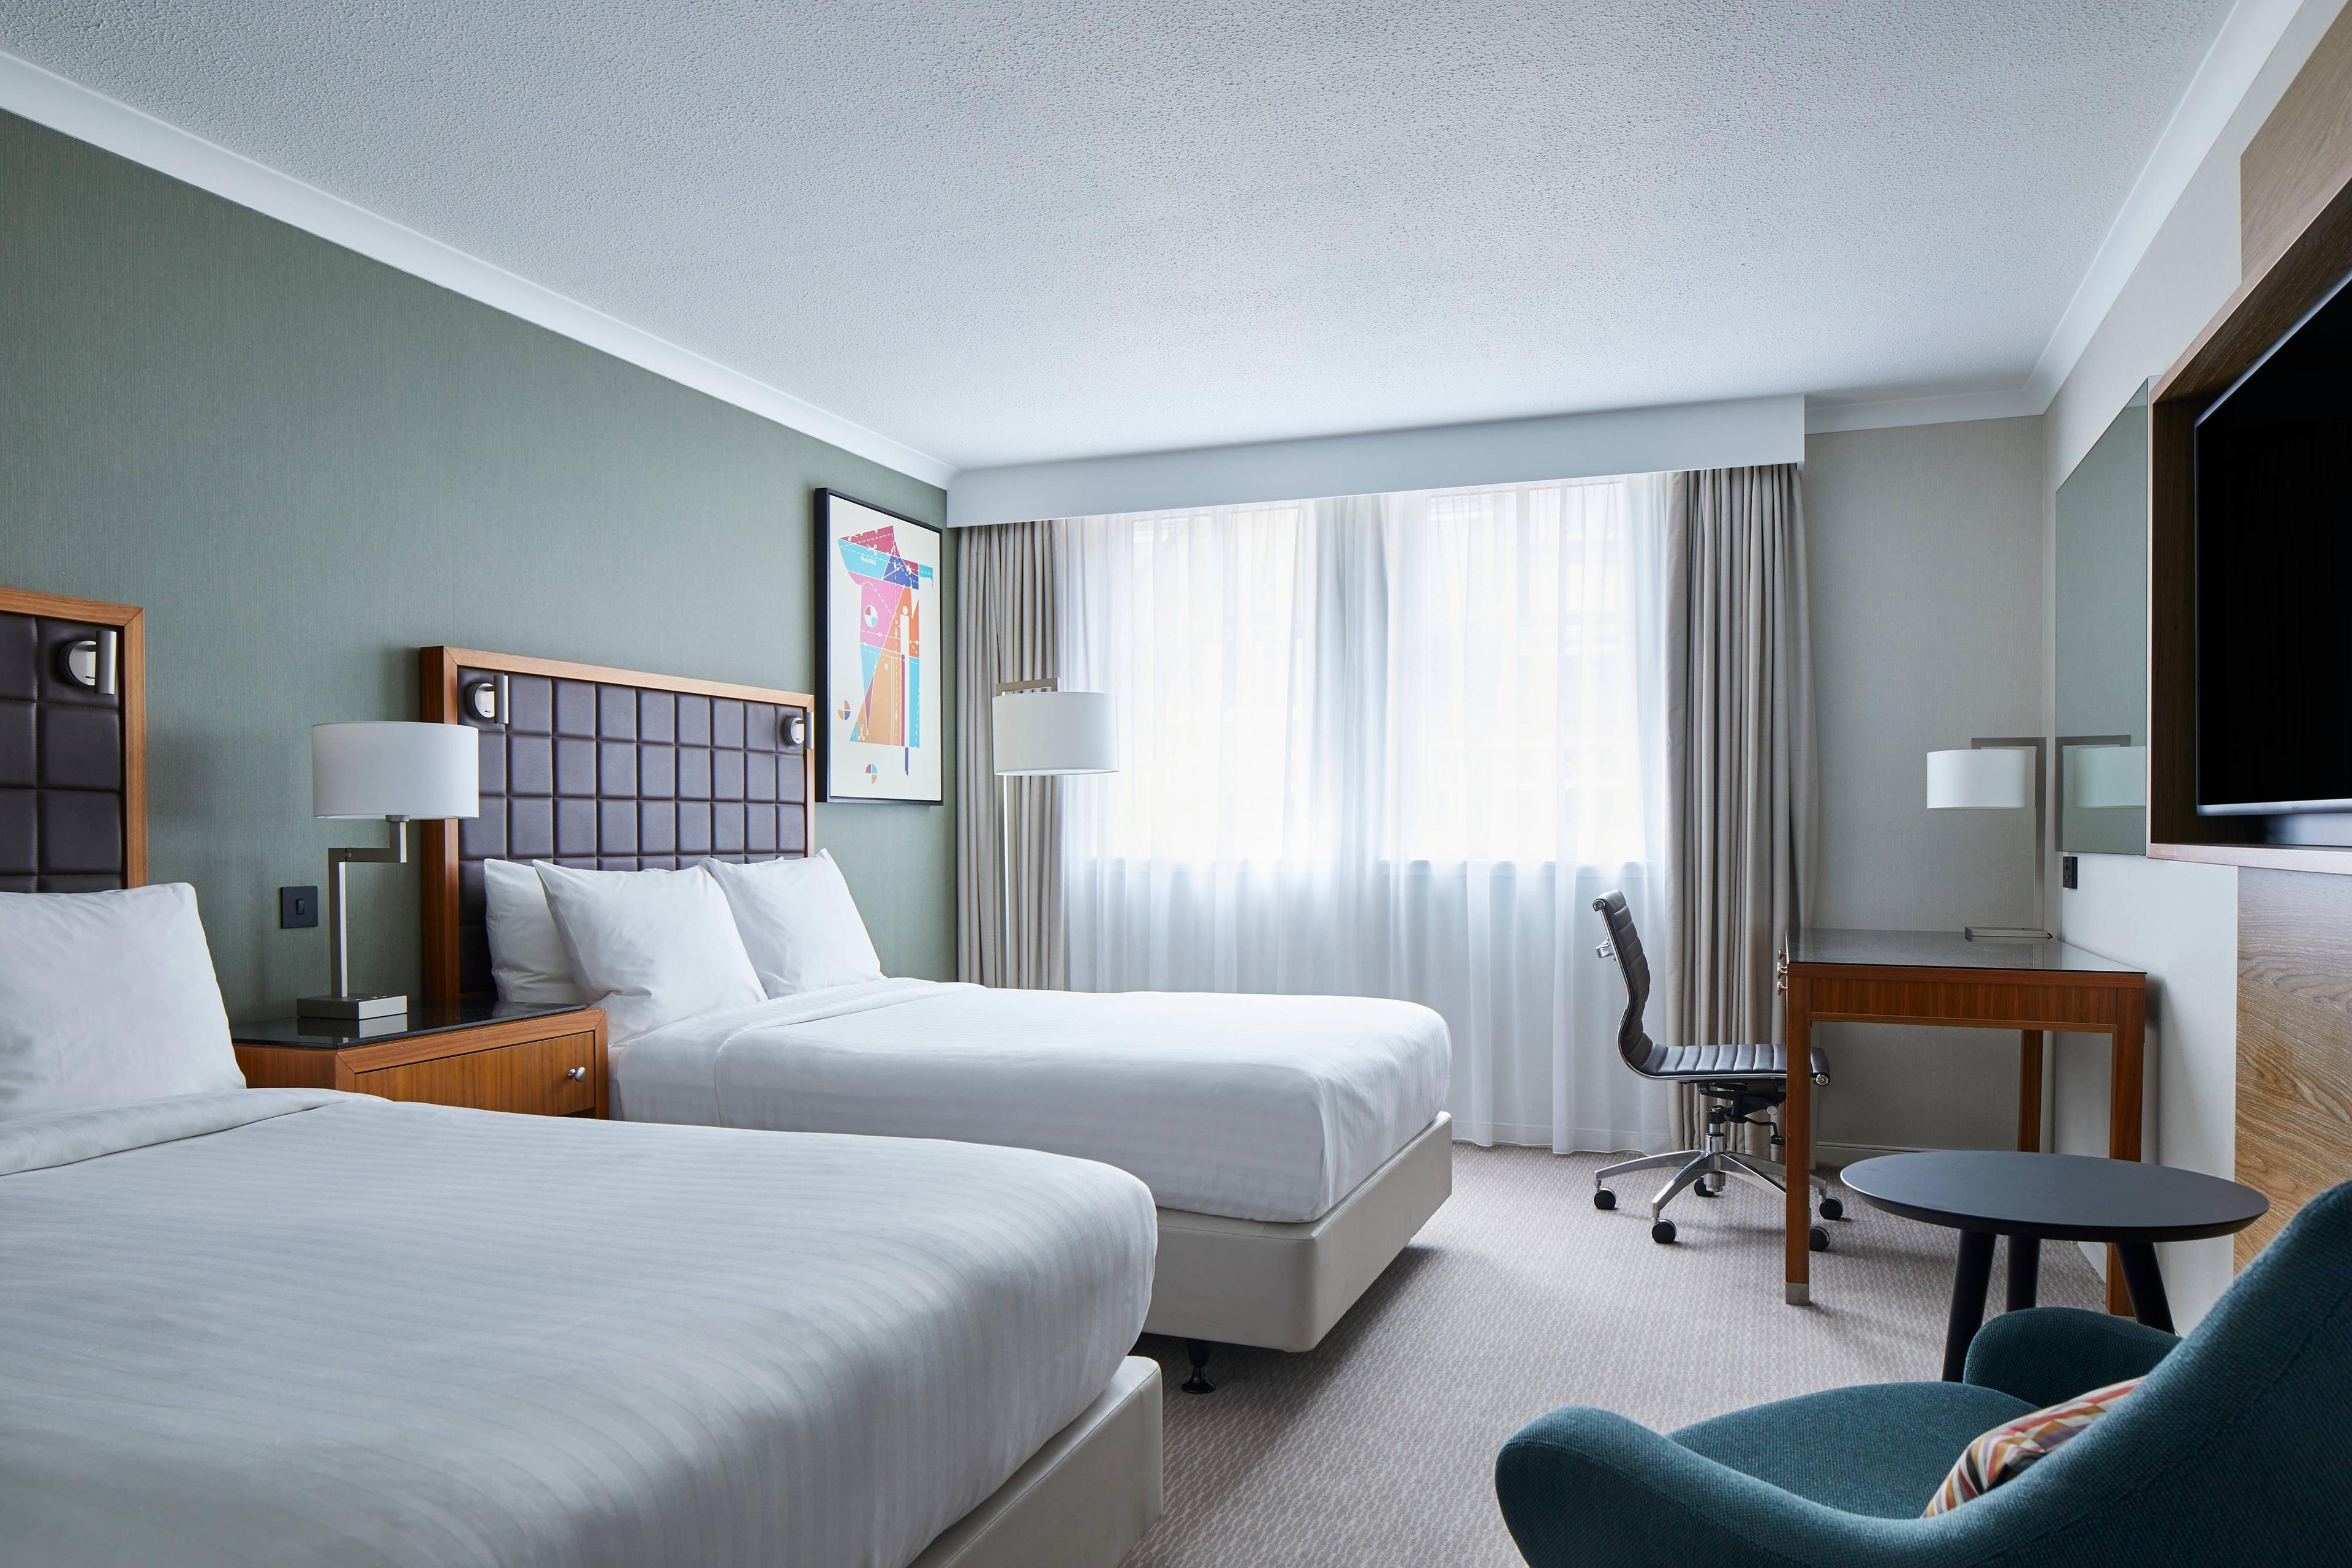 Enjoy plenty of space and comfort in our Deluxe Double/Double guest room with high-speed Wi-Fi access, a coffee and tea maker and a flat-screen TV.